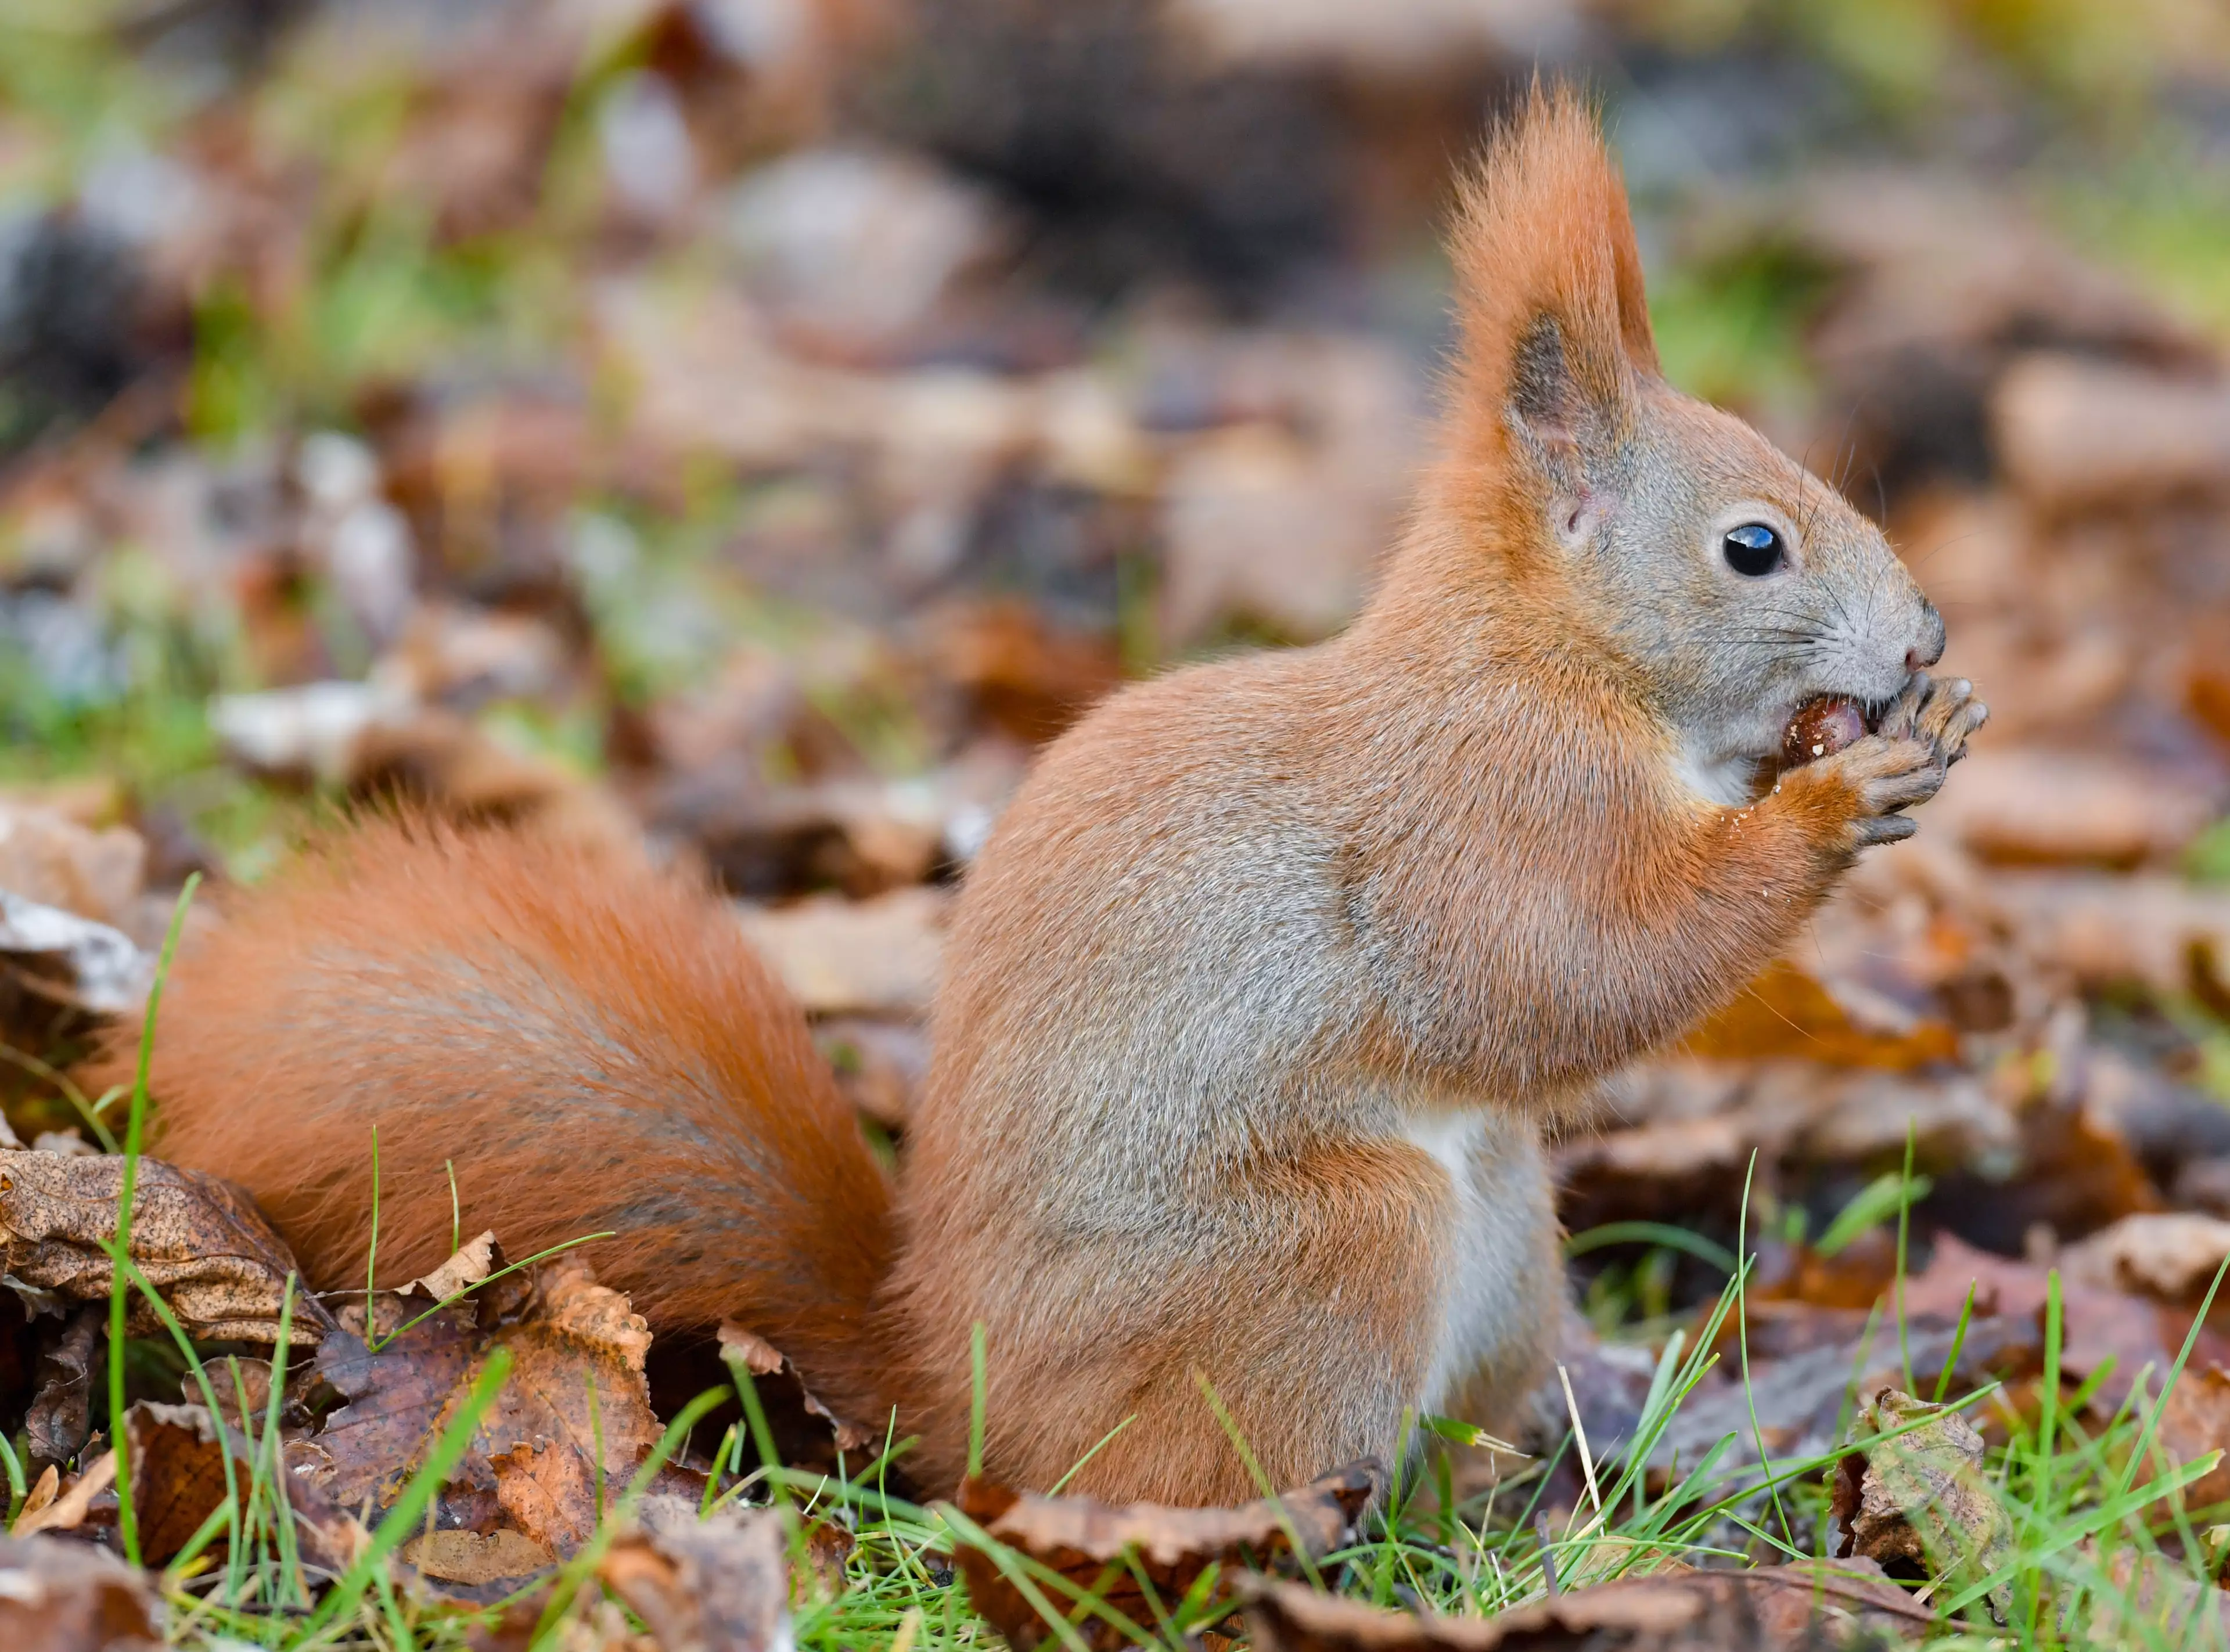 A squirrel in the US tested positive for the bubonic plague.